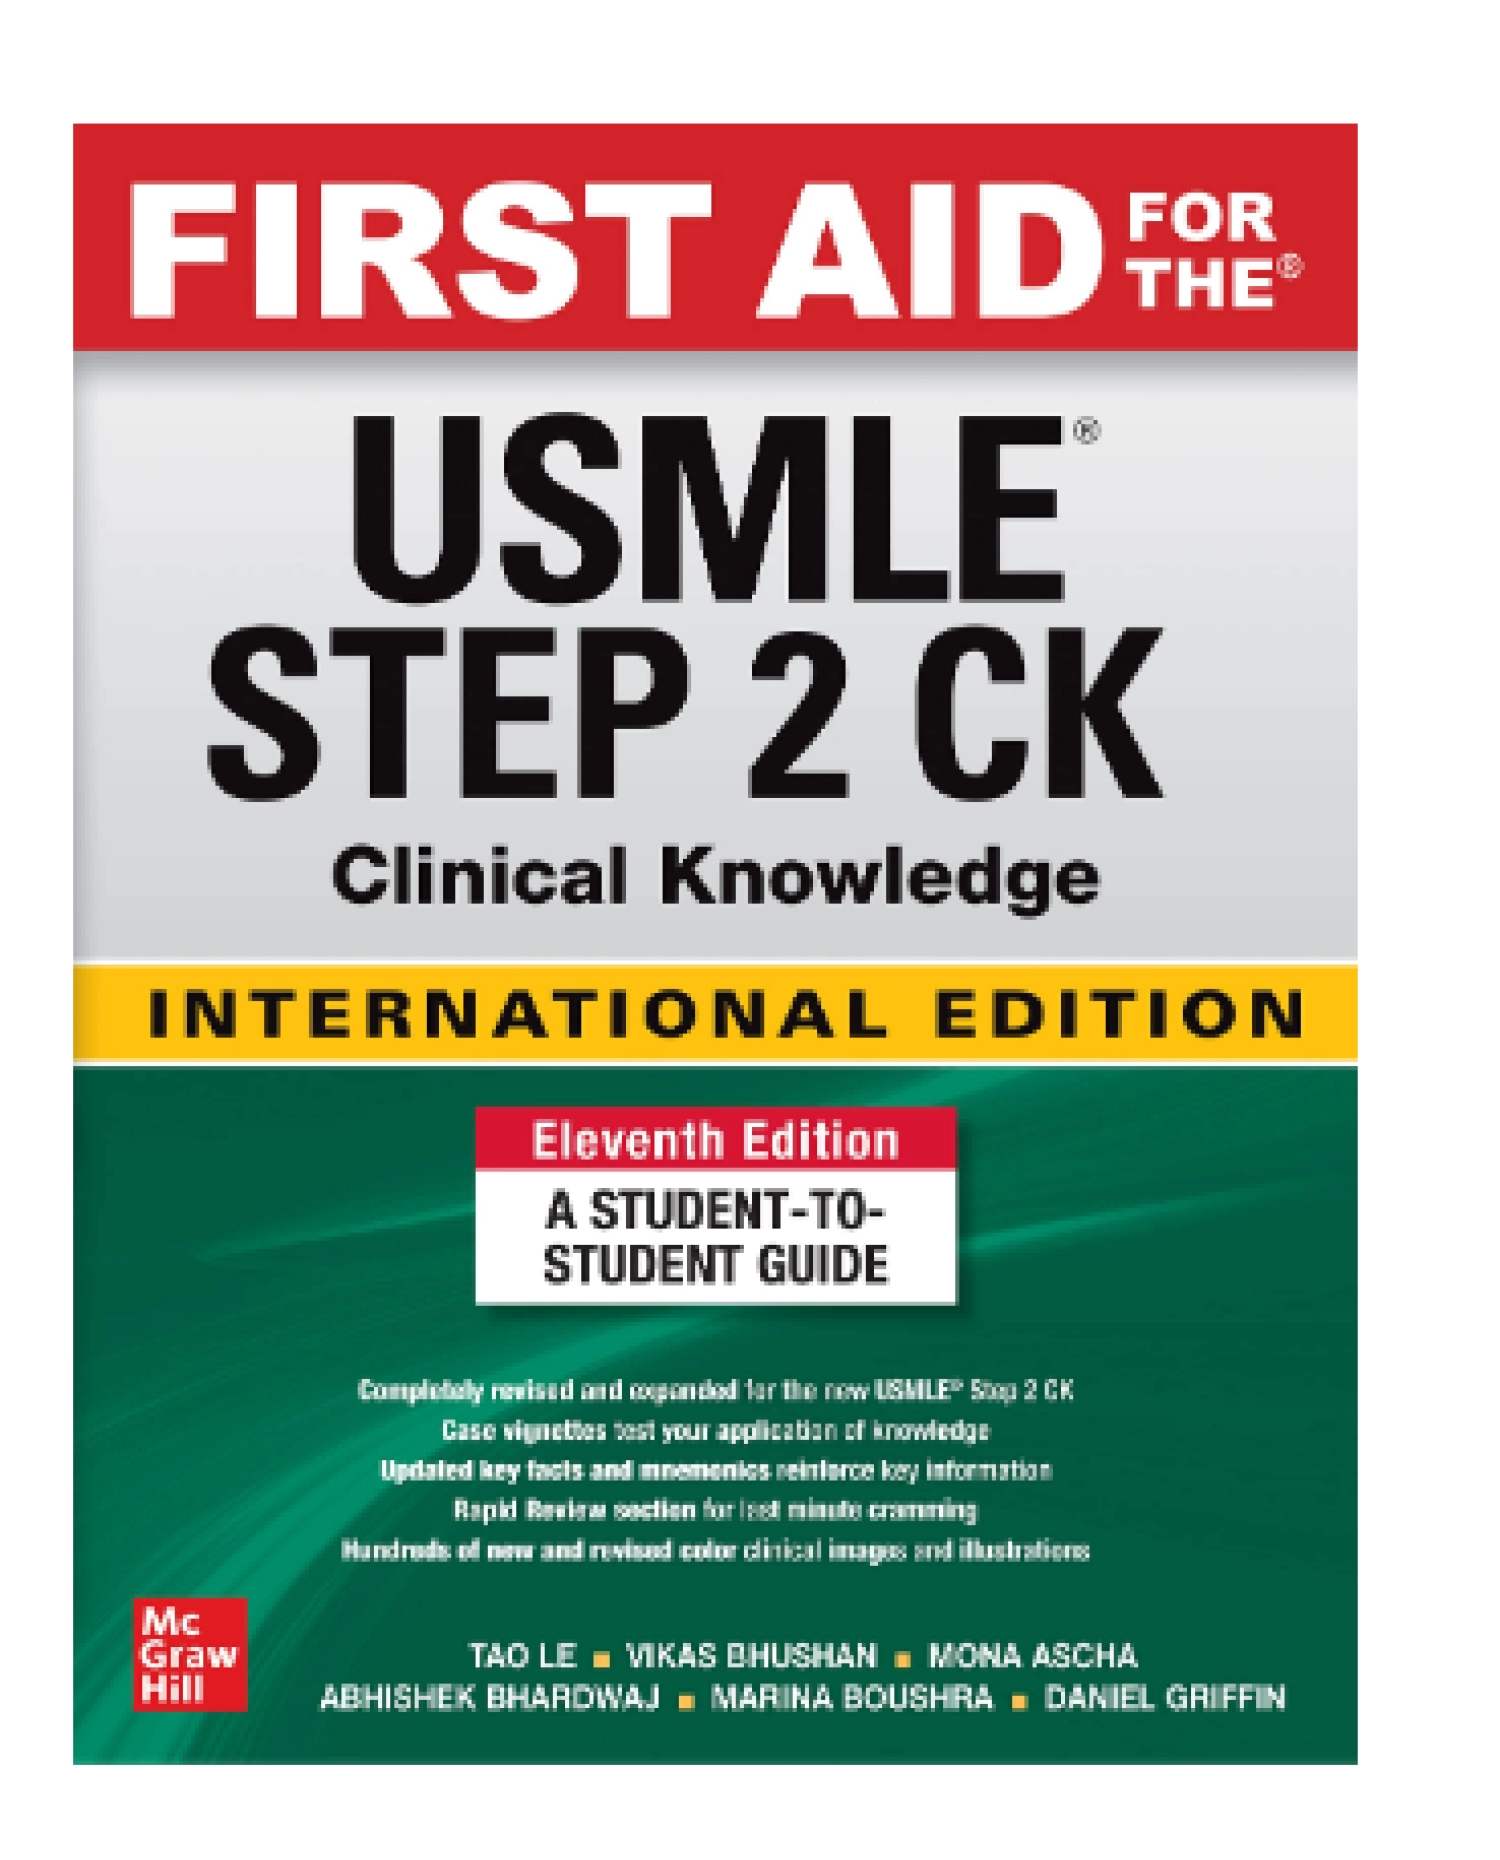 First Aid for the USMLE Step 2 Ck, 11th Edition